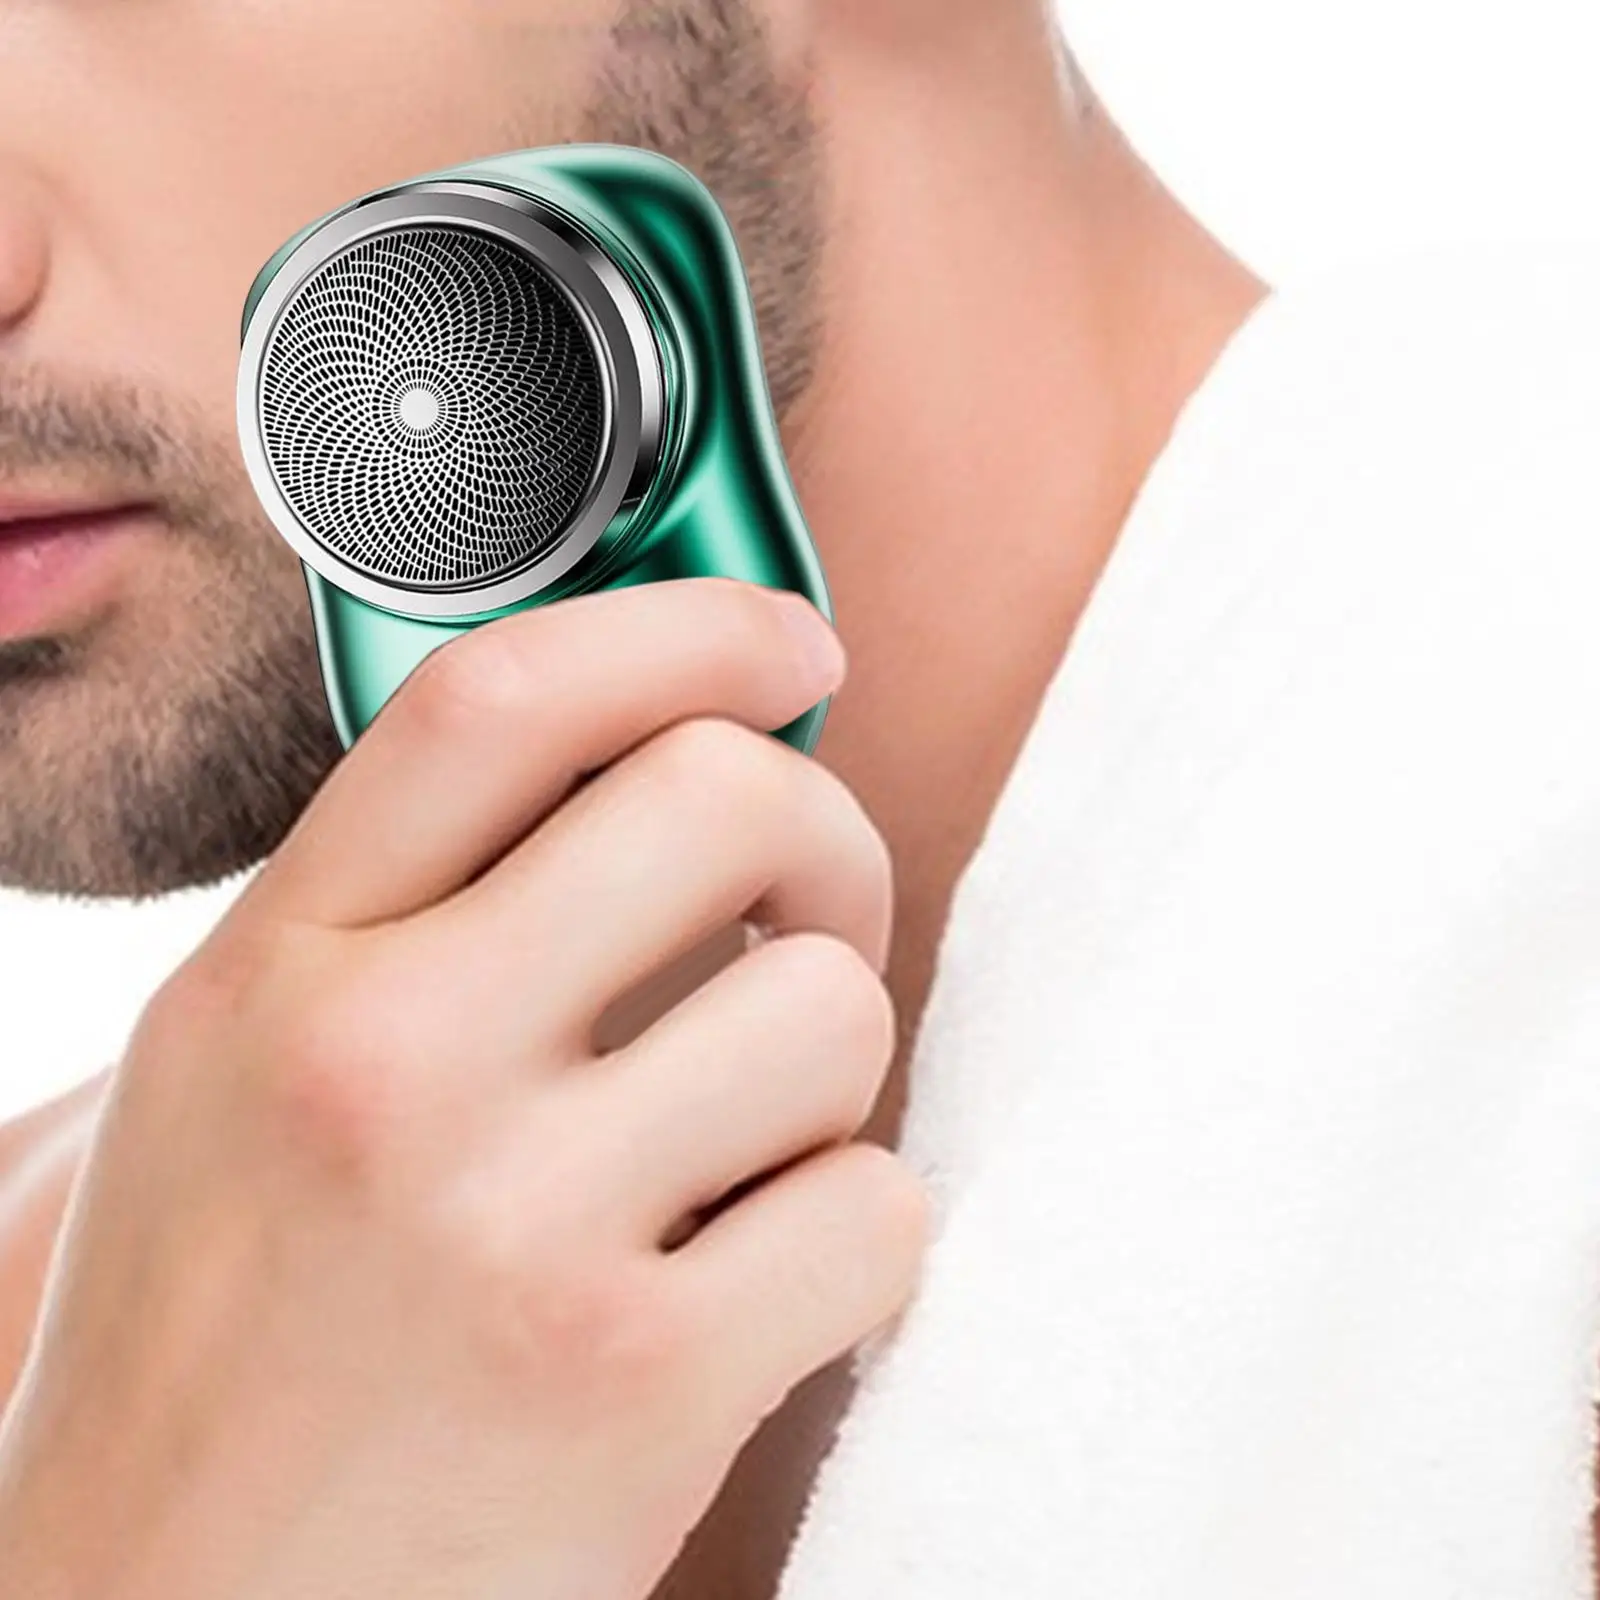 electric Shaver Precision Trimmer Razor Rechargeable Pocket Size for Arm